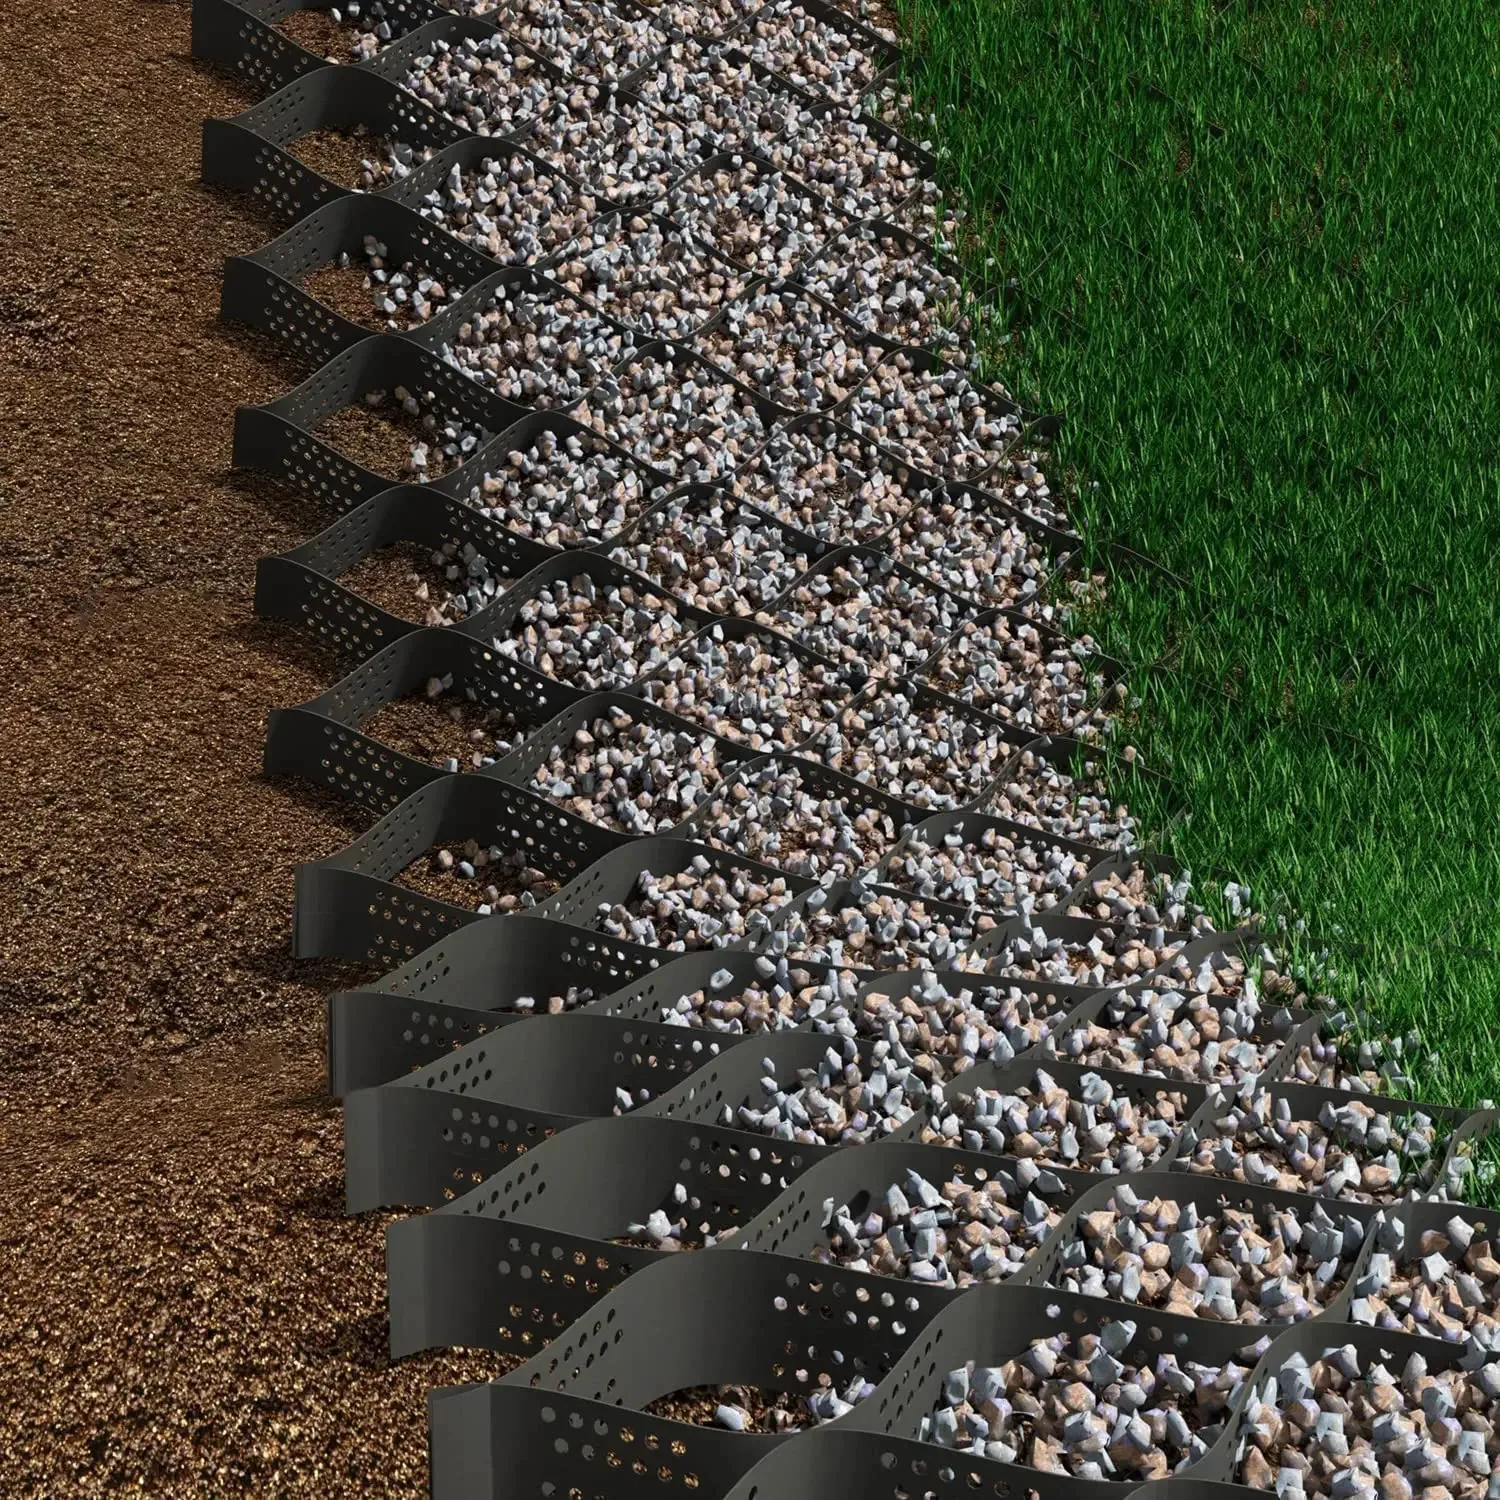 YUEWO HDPE 2 Inch (9x17FT) 155 sq ft Geocells Cellular Confinement System Gravel Grid Ground Stabilization Grid Paver for Gravel